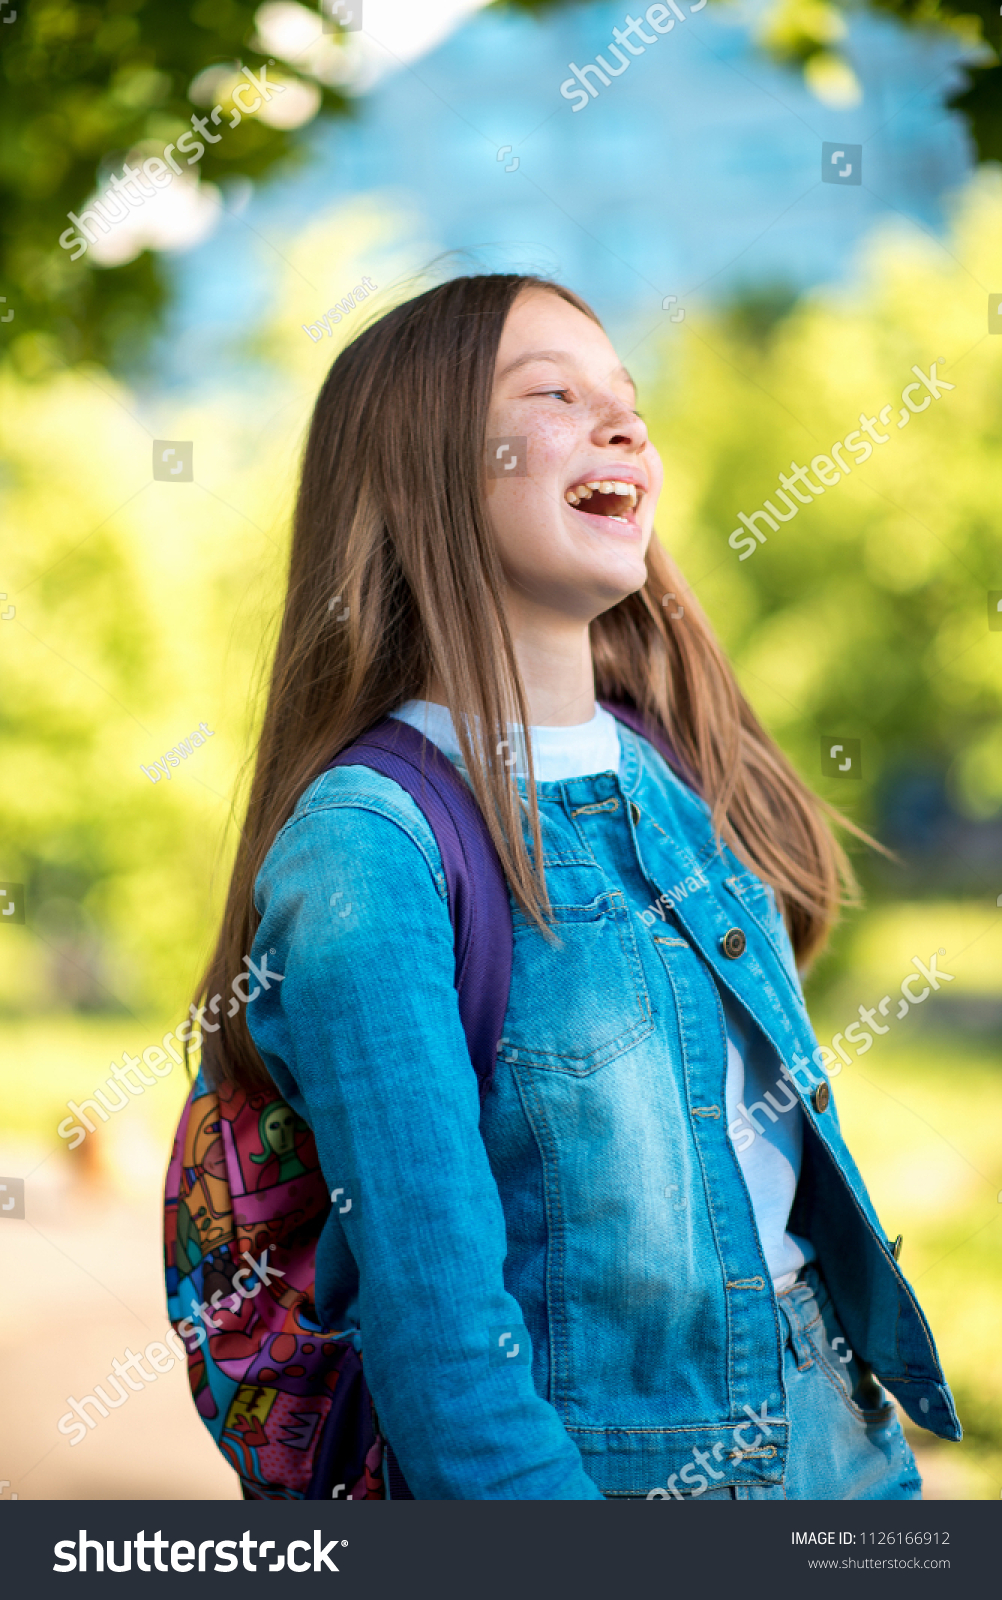 Beautiful schoolgirl girl. Summer in nature. Dressed in jeans clothes behind her backpack. Concept back to school. Emotion of happiness pleasure pleasure, bright children's laughter. #1126166912